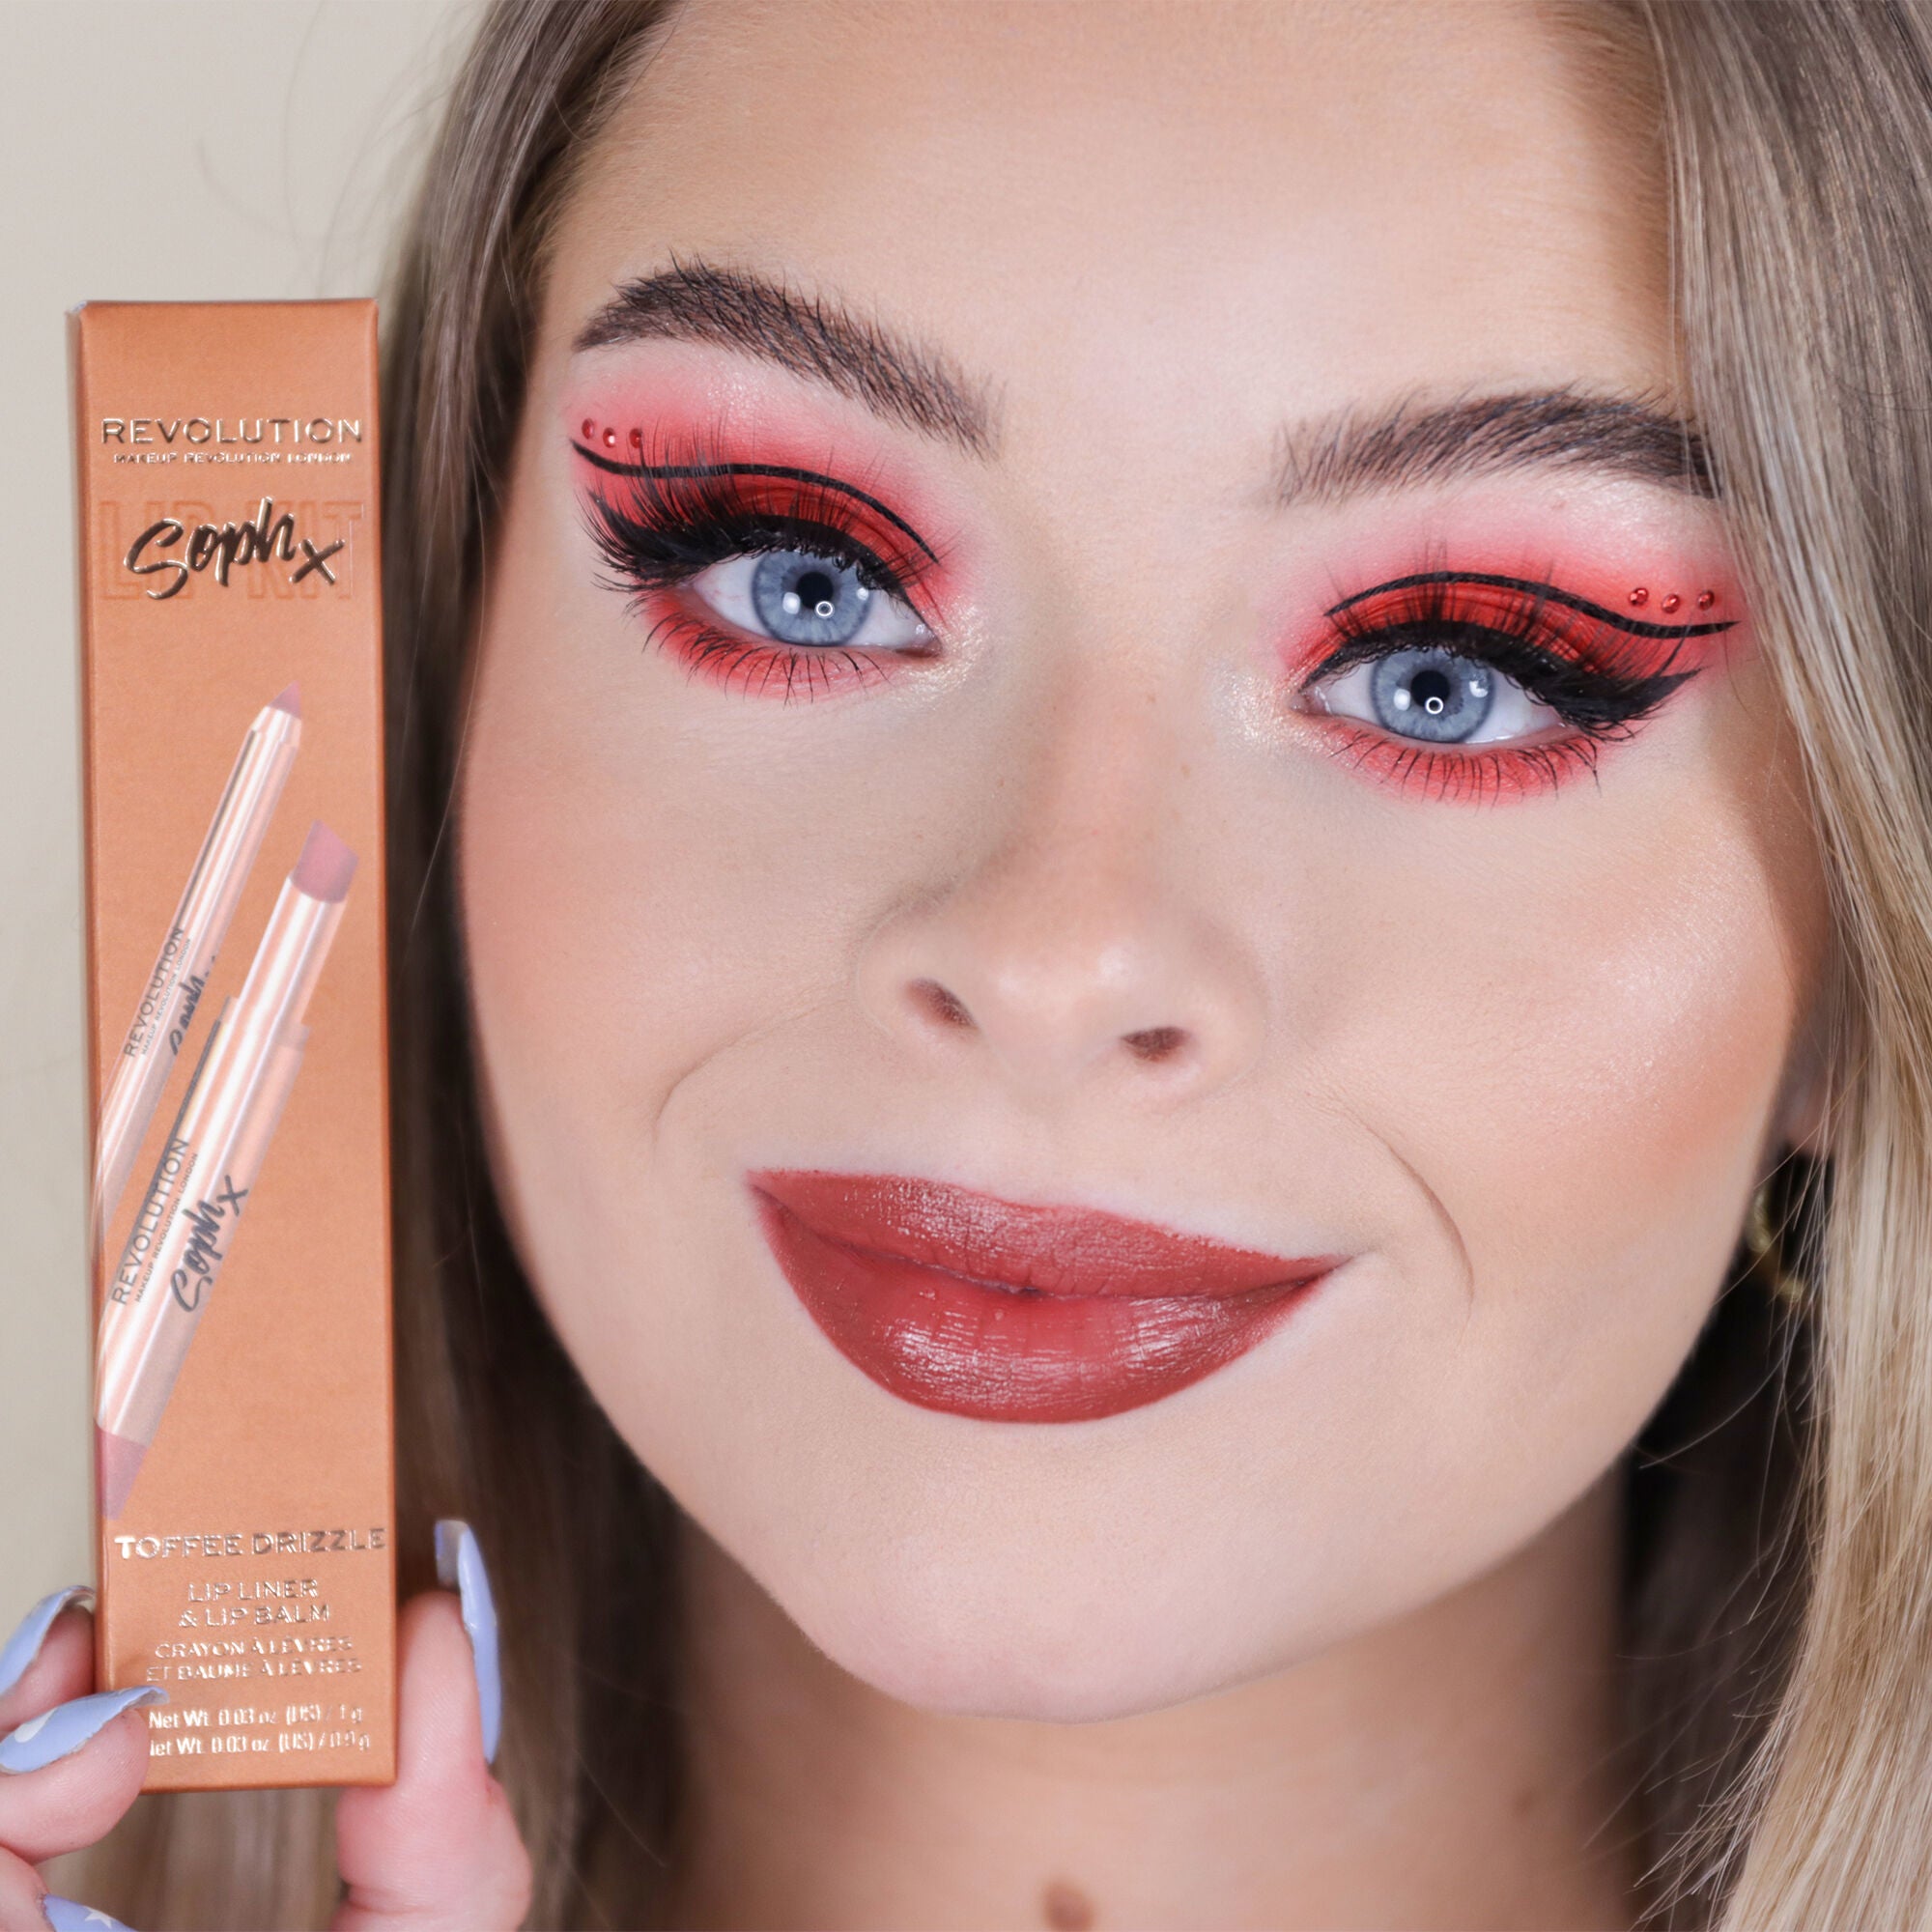 Soph wearing Makeup Revolution X Soph Lip Set - Toffee Drizzle